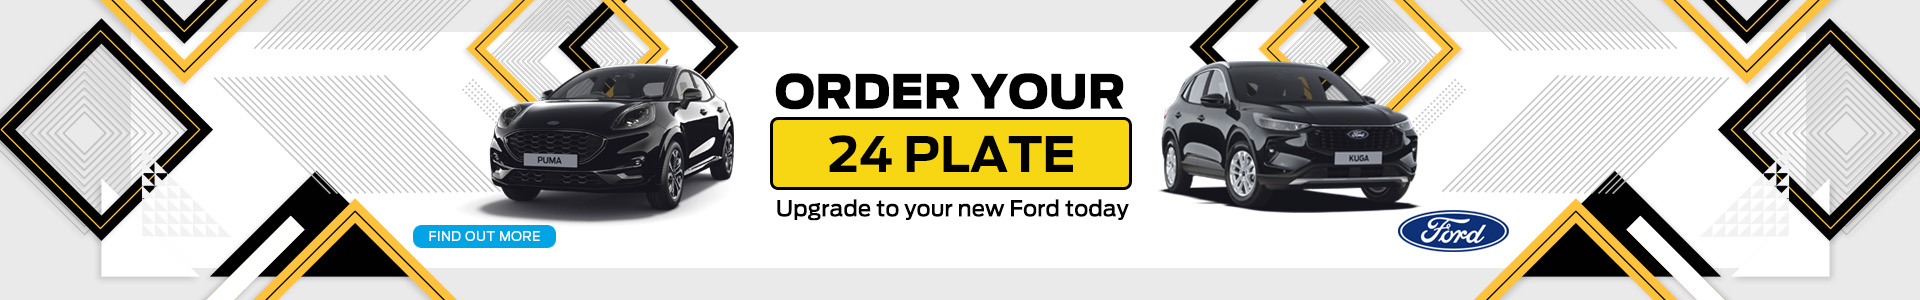 Order your new 24 plate - In Stock and Ready to go!